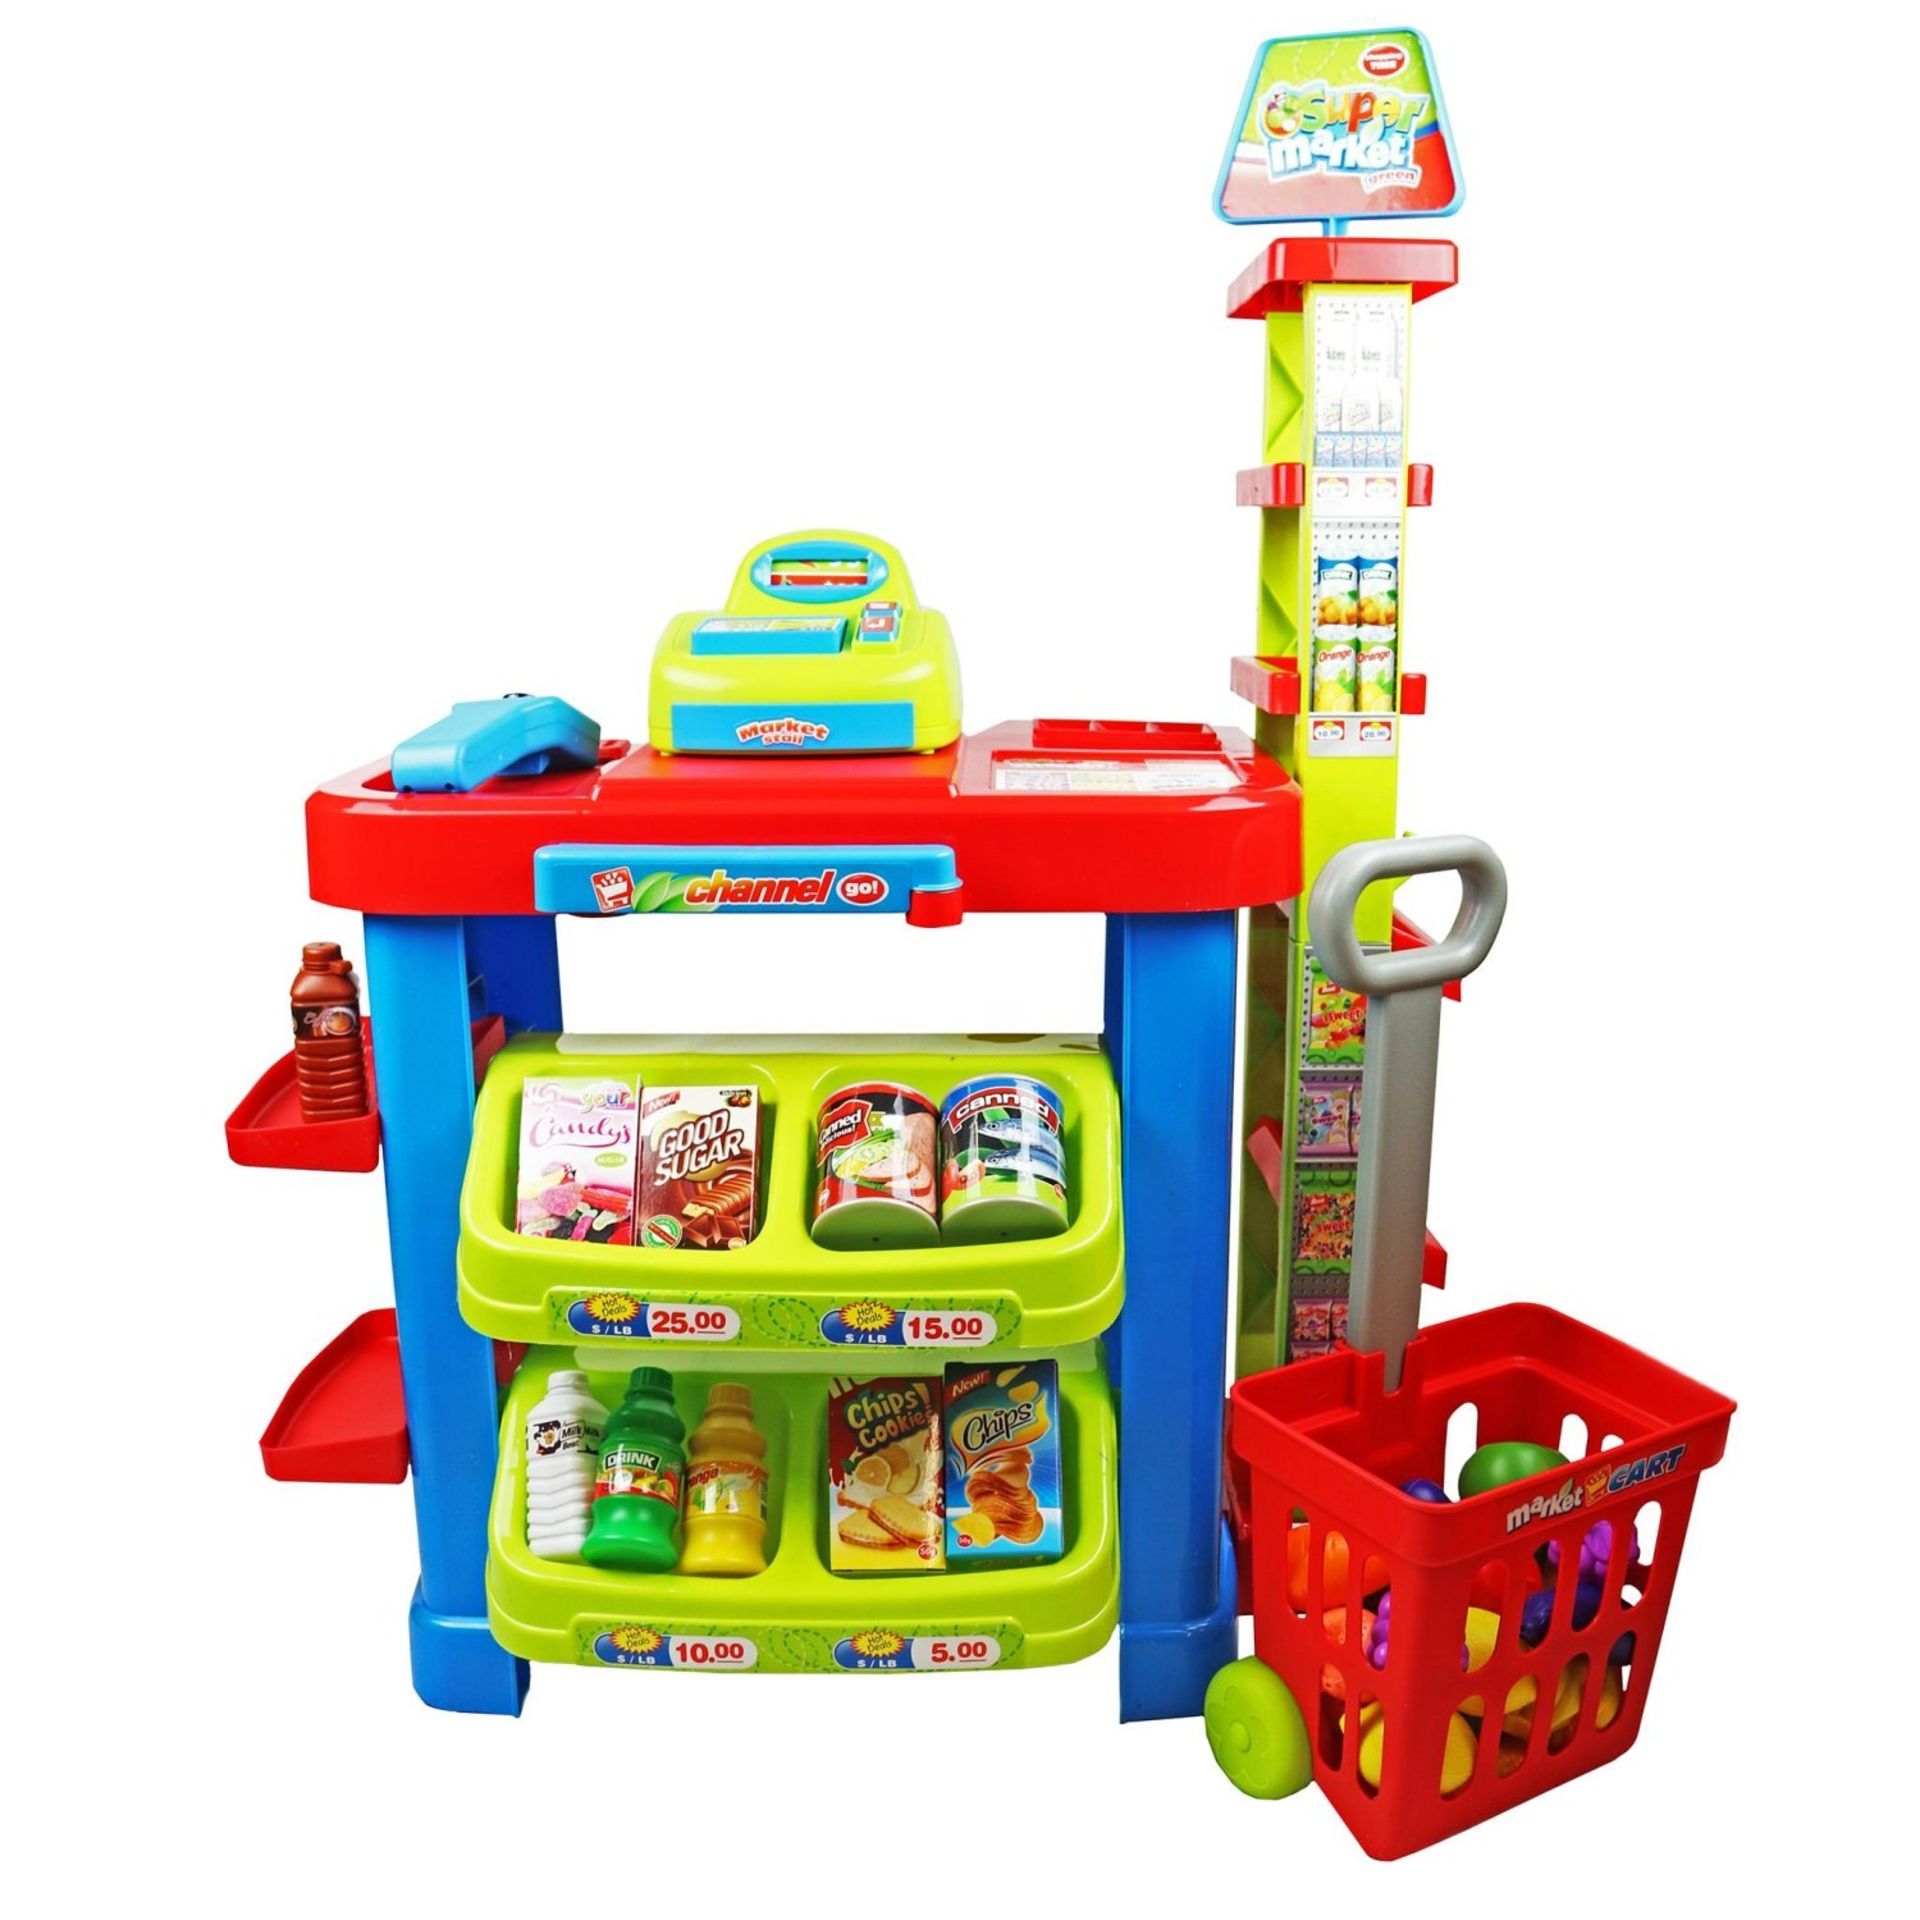 (D15) Childrens Kids Supermarket Shop Grocery Pretend Toy Play Set Suitable For Ages 3 And Abo...